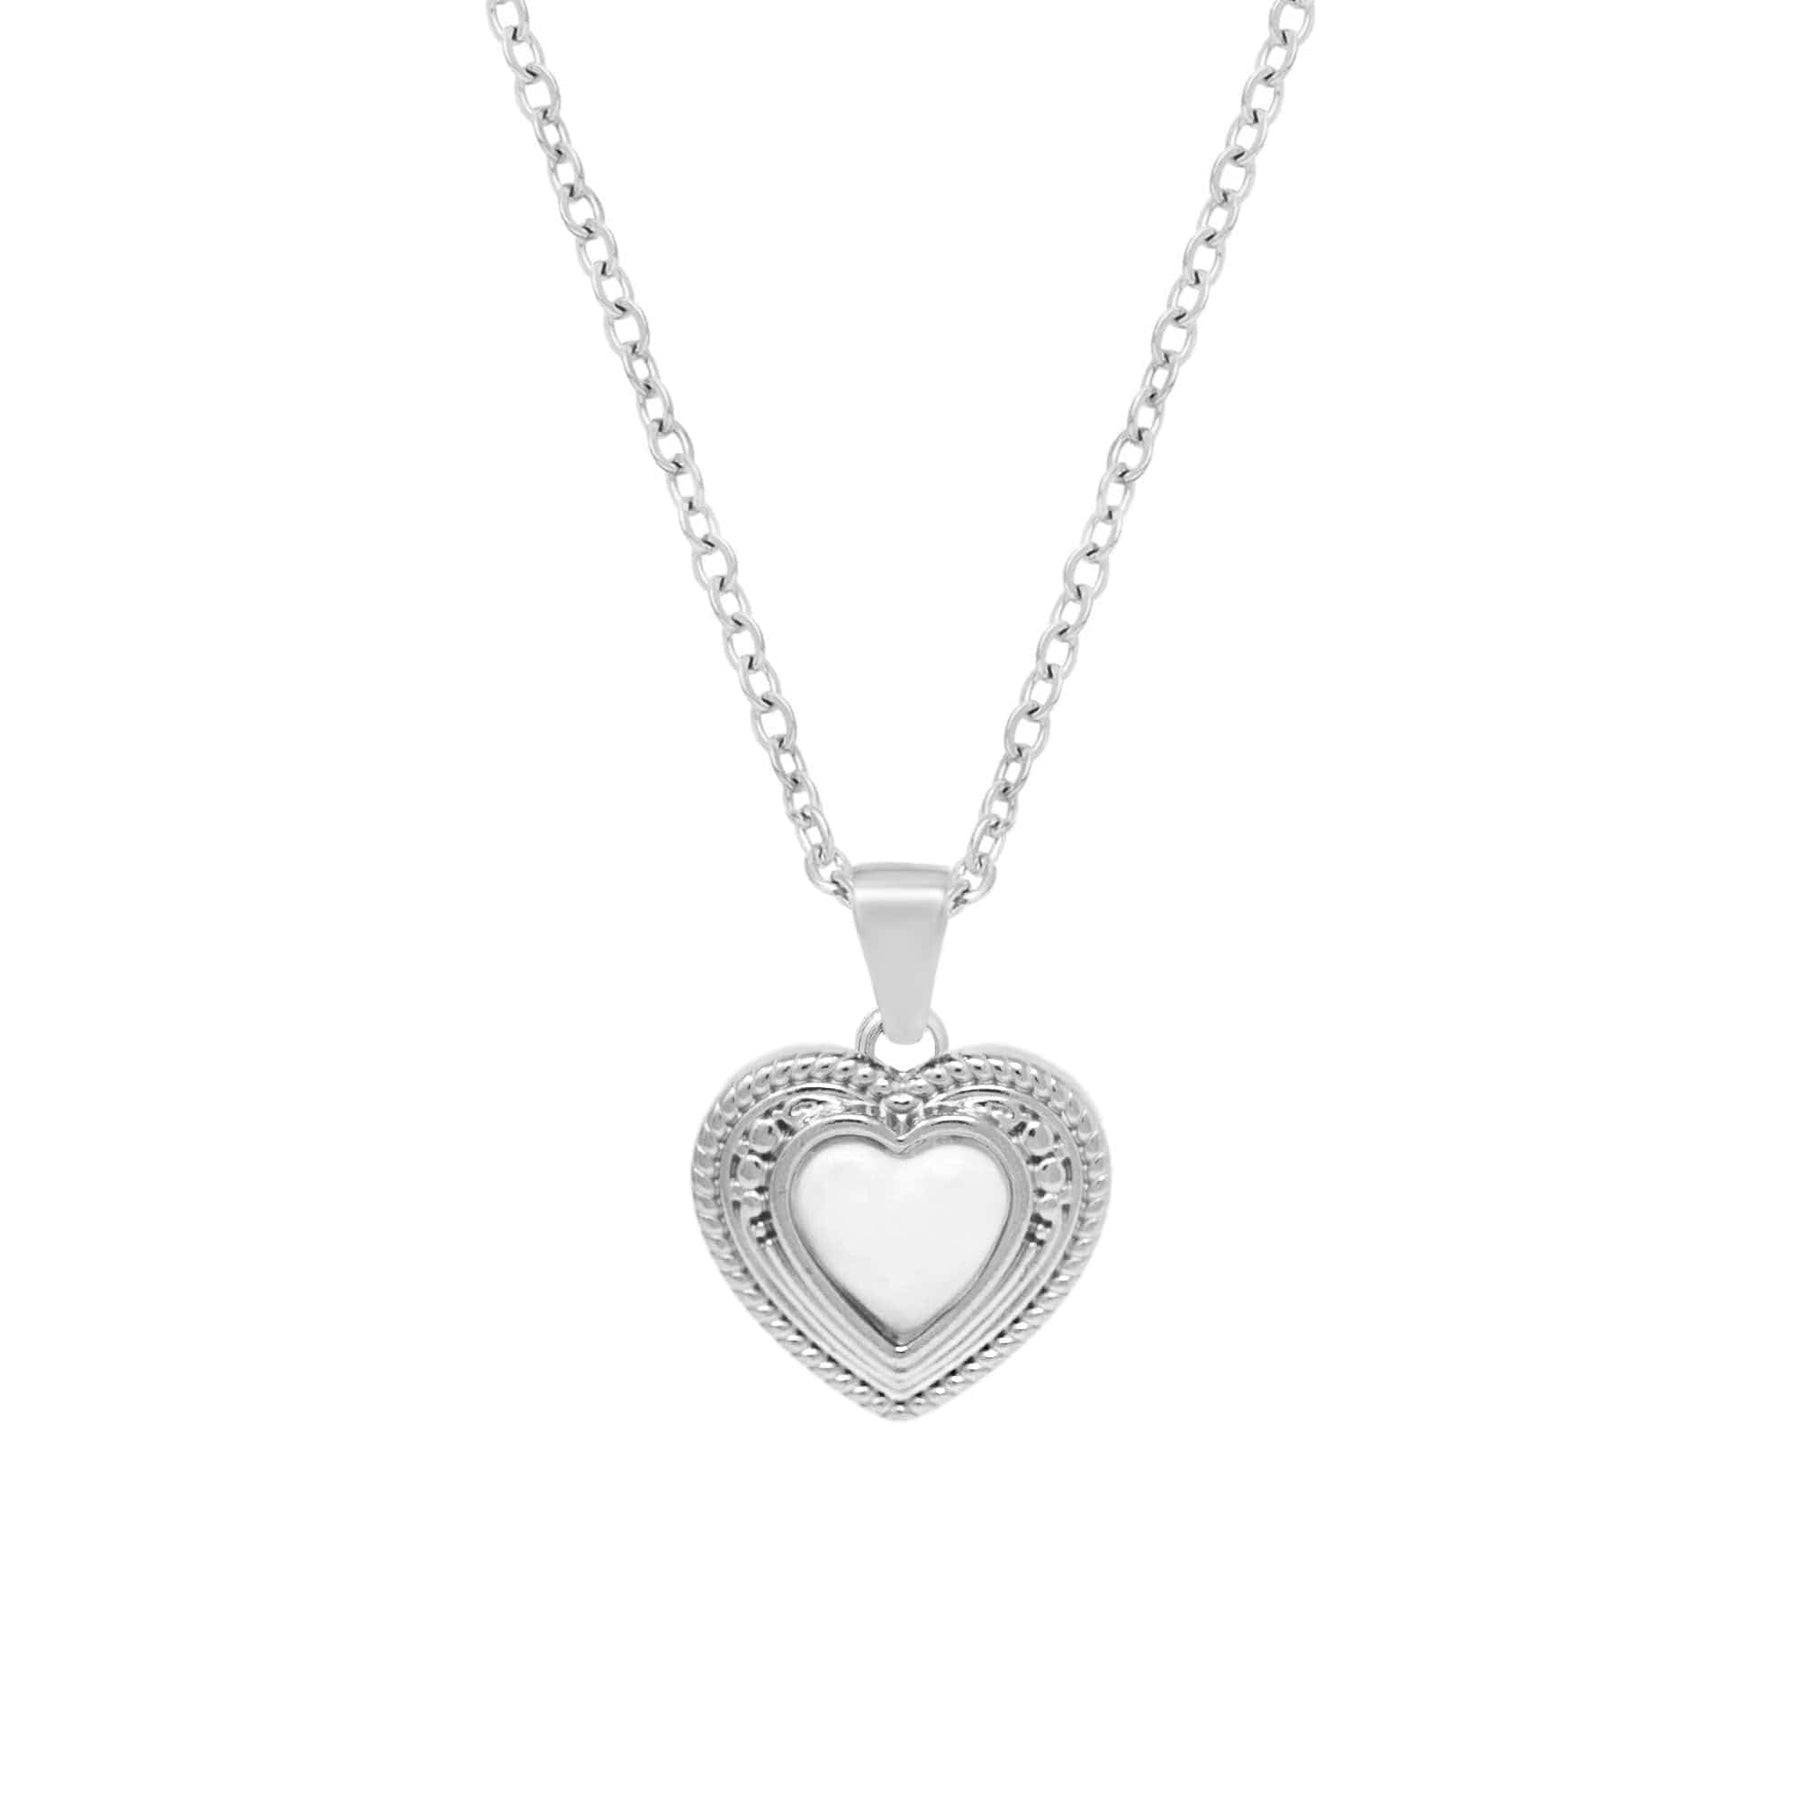 BohoMoon Stainless Steel Heartthrob Necklace Silver